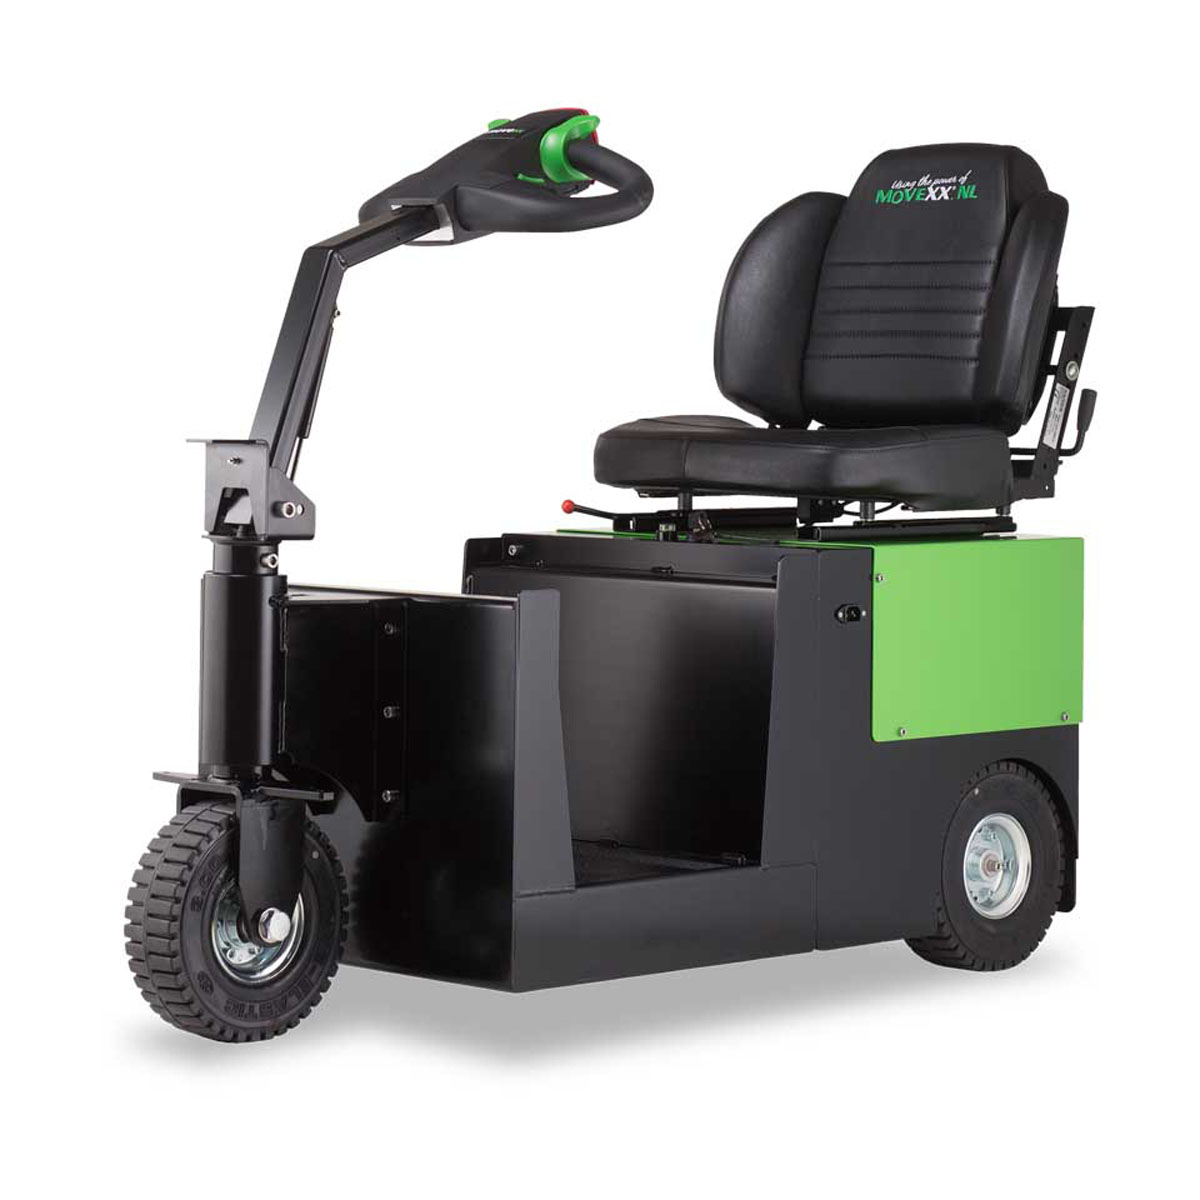 Buy Ride-on Electric Tug  in Electric Tugs from Movexx available at Astrolift NZ